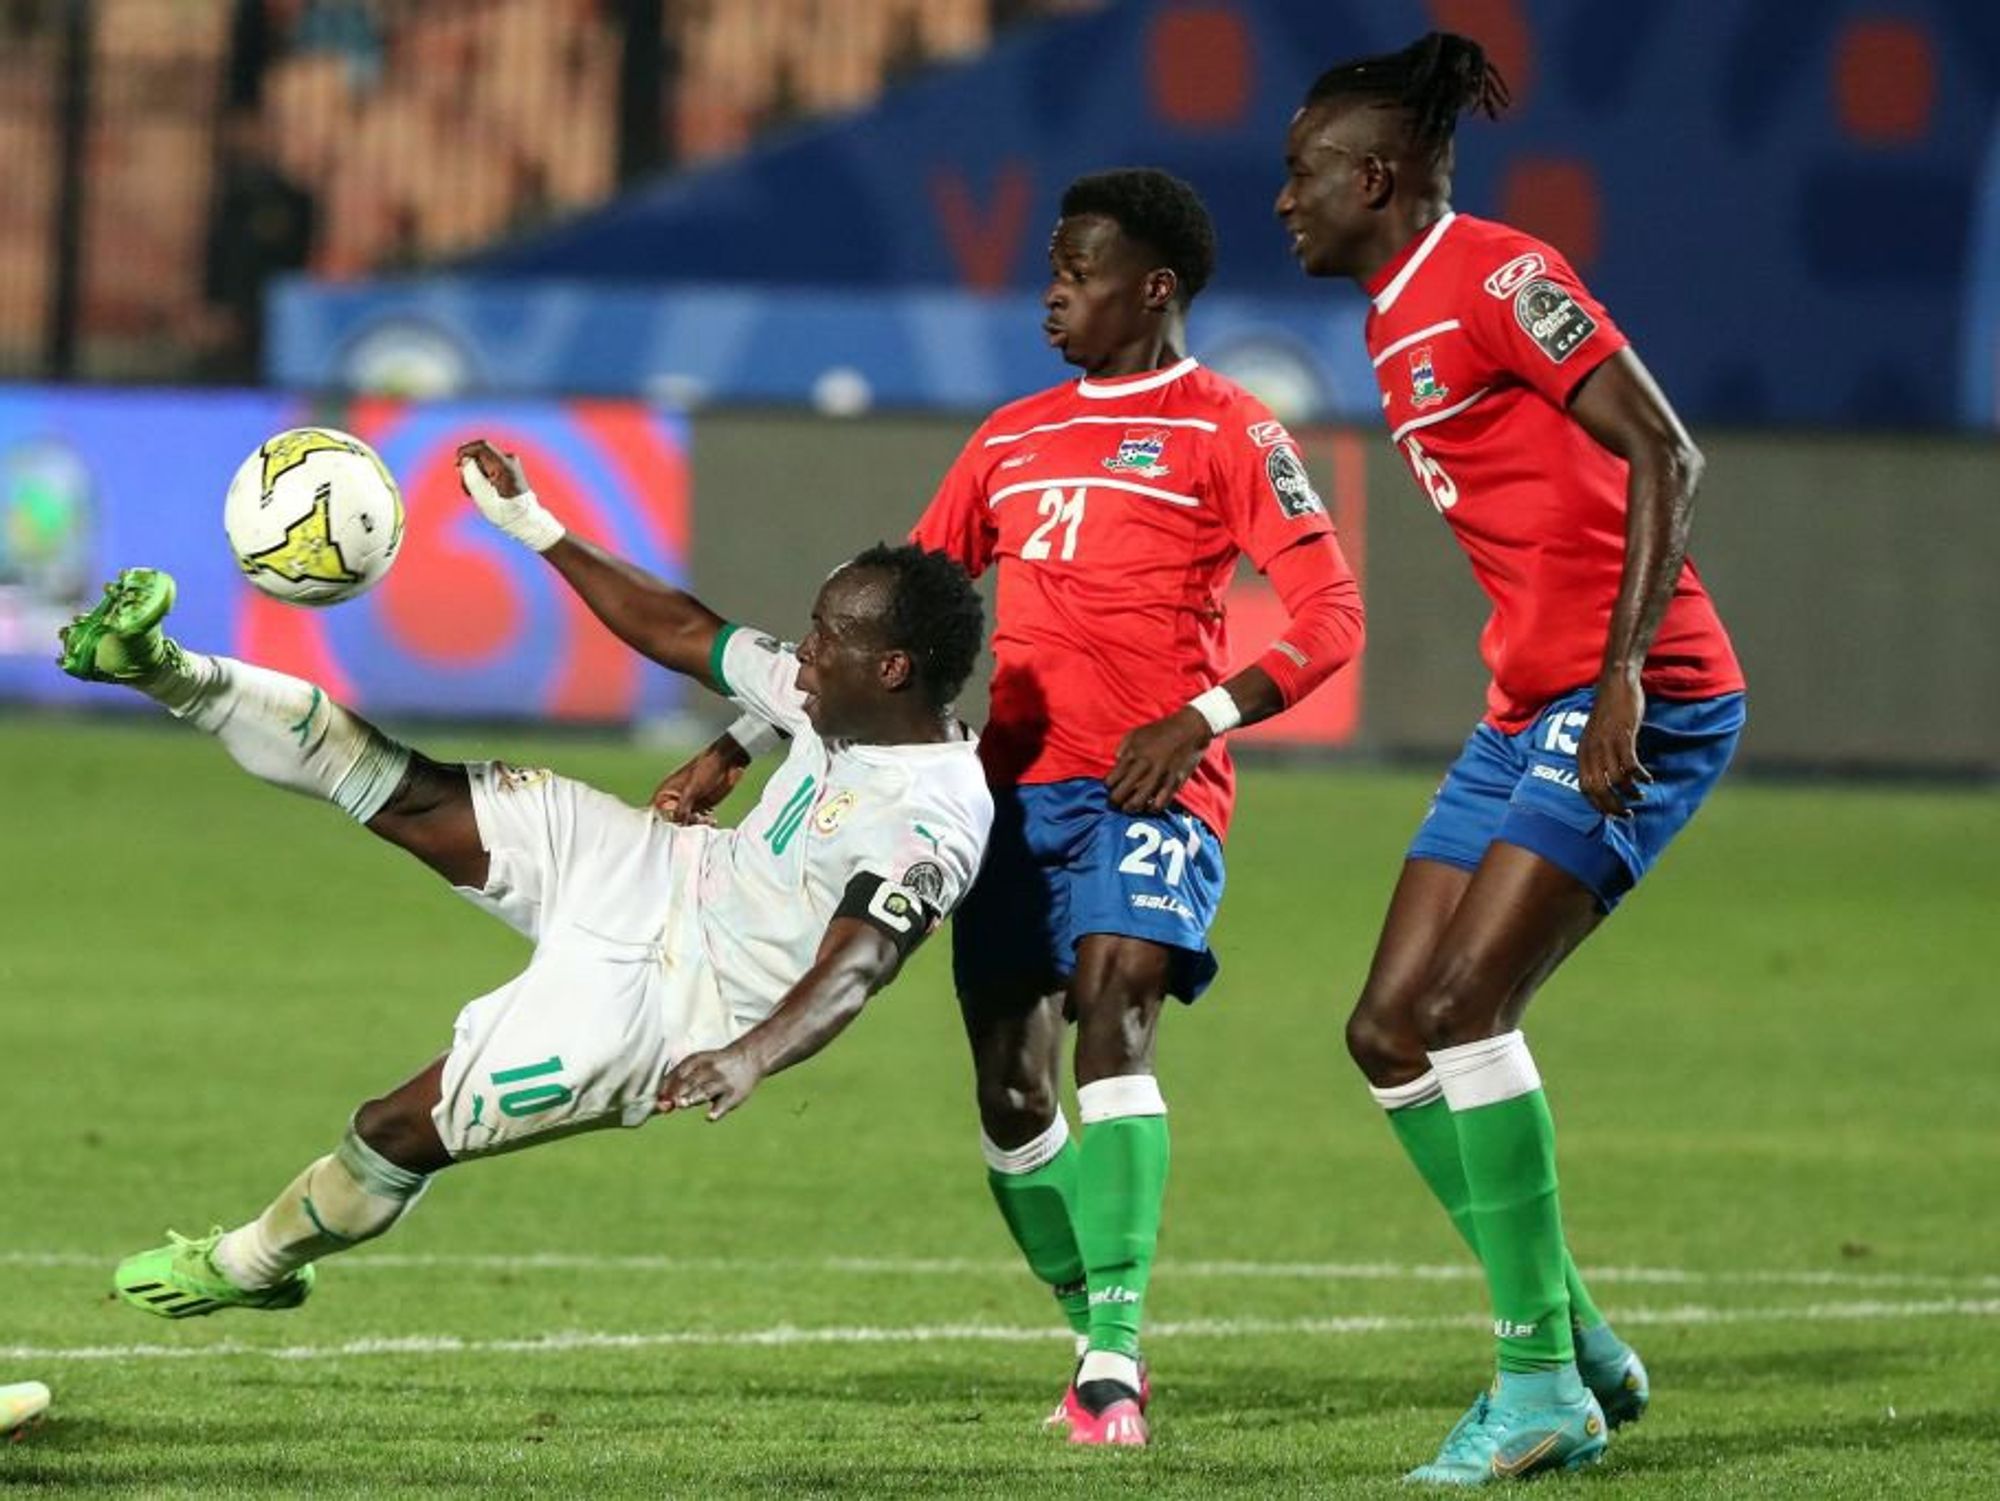 Samba Diallo L of Senegal shoots during the final between Senegal and Gambia at the 2023 CAF Confederation of African Football U-20 Africa Cup of Nations football match in Cairo, Egypt, March 11, 2023.